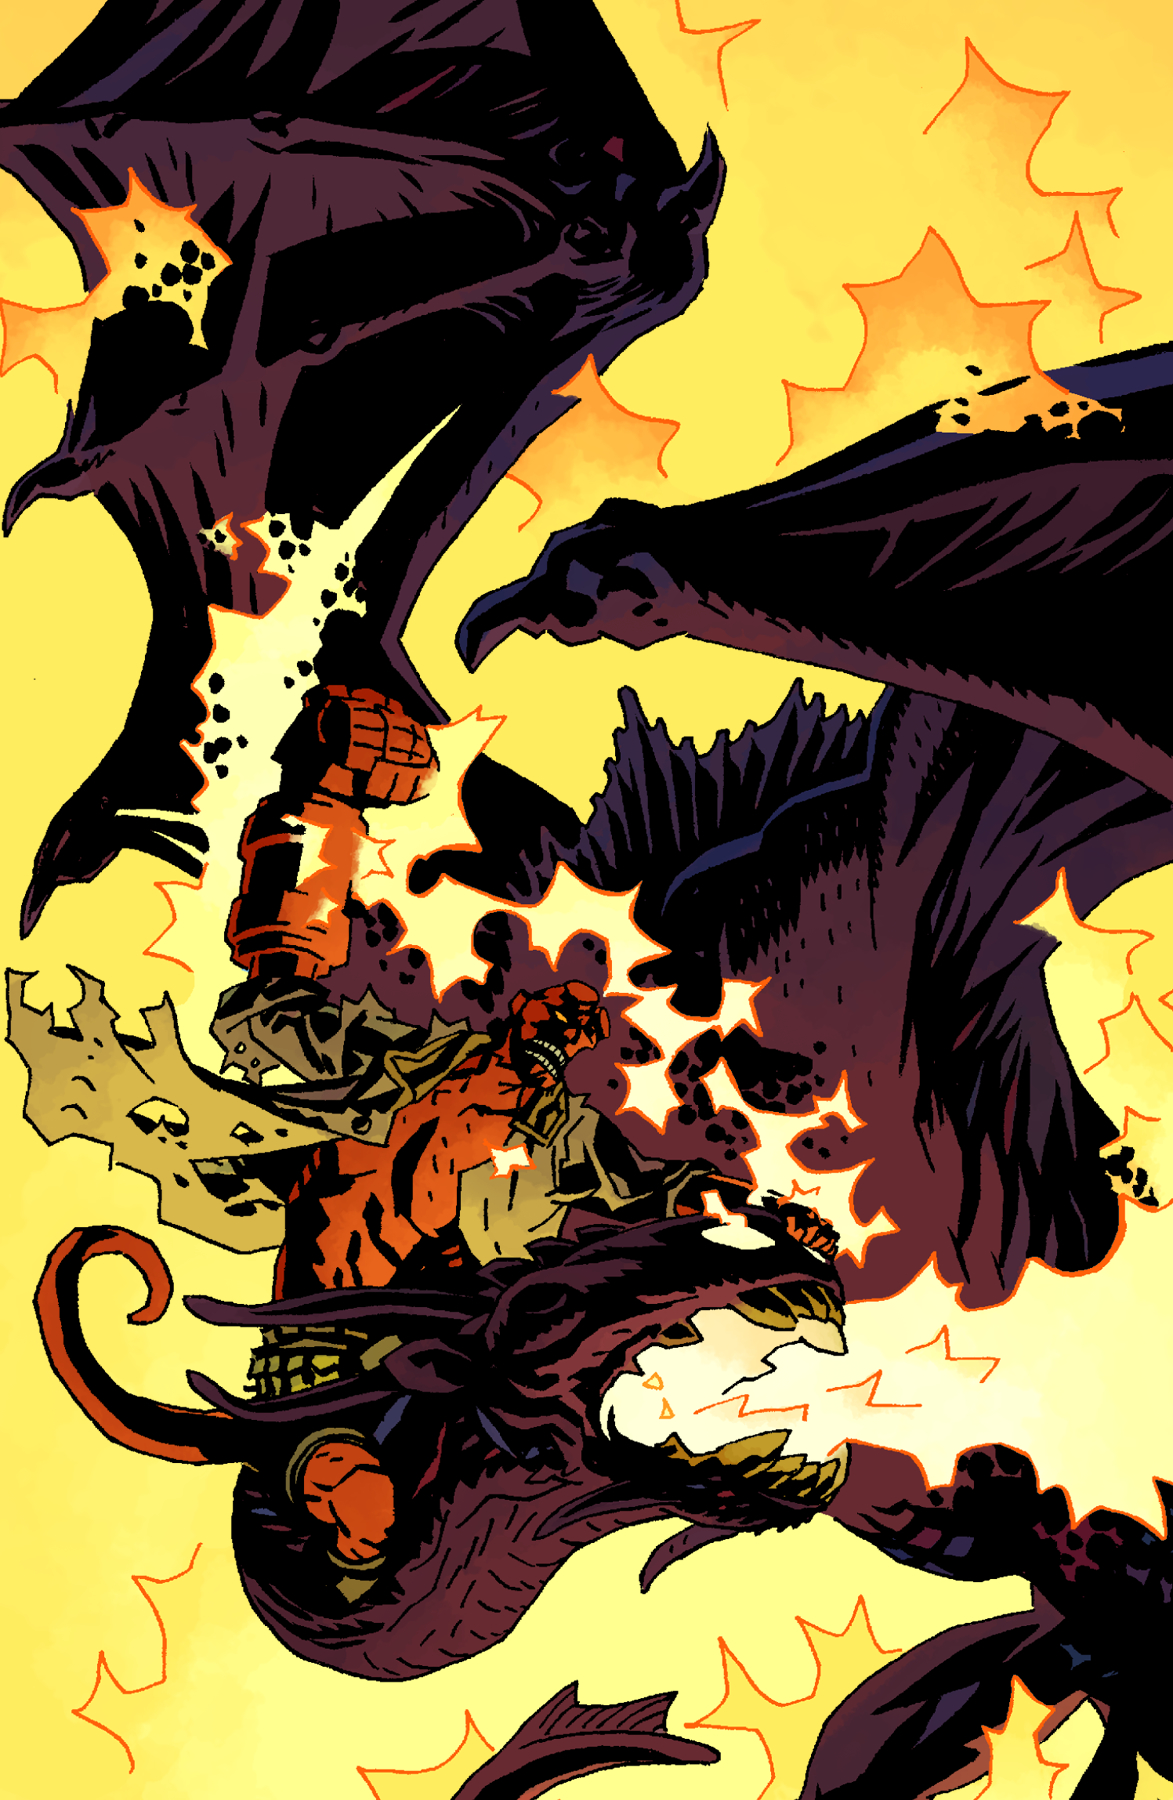 HELLBOY TP VOL 12 THE STORM AND THE FURY (OCT110020)